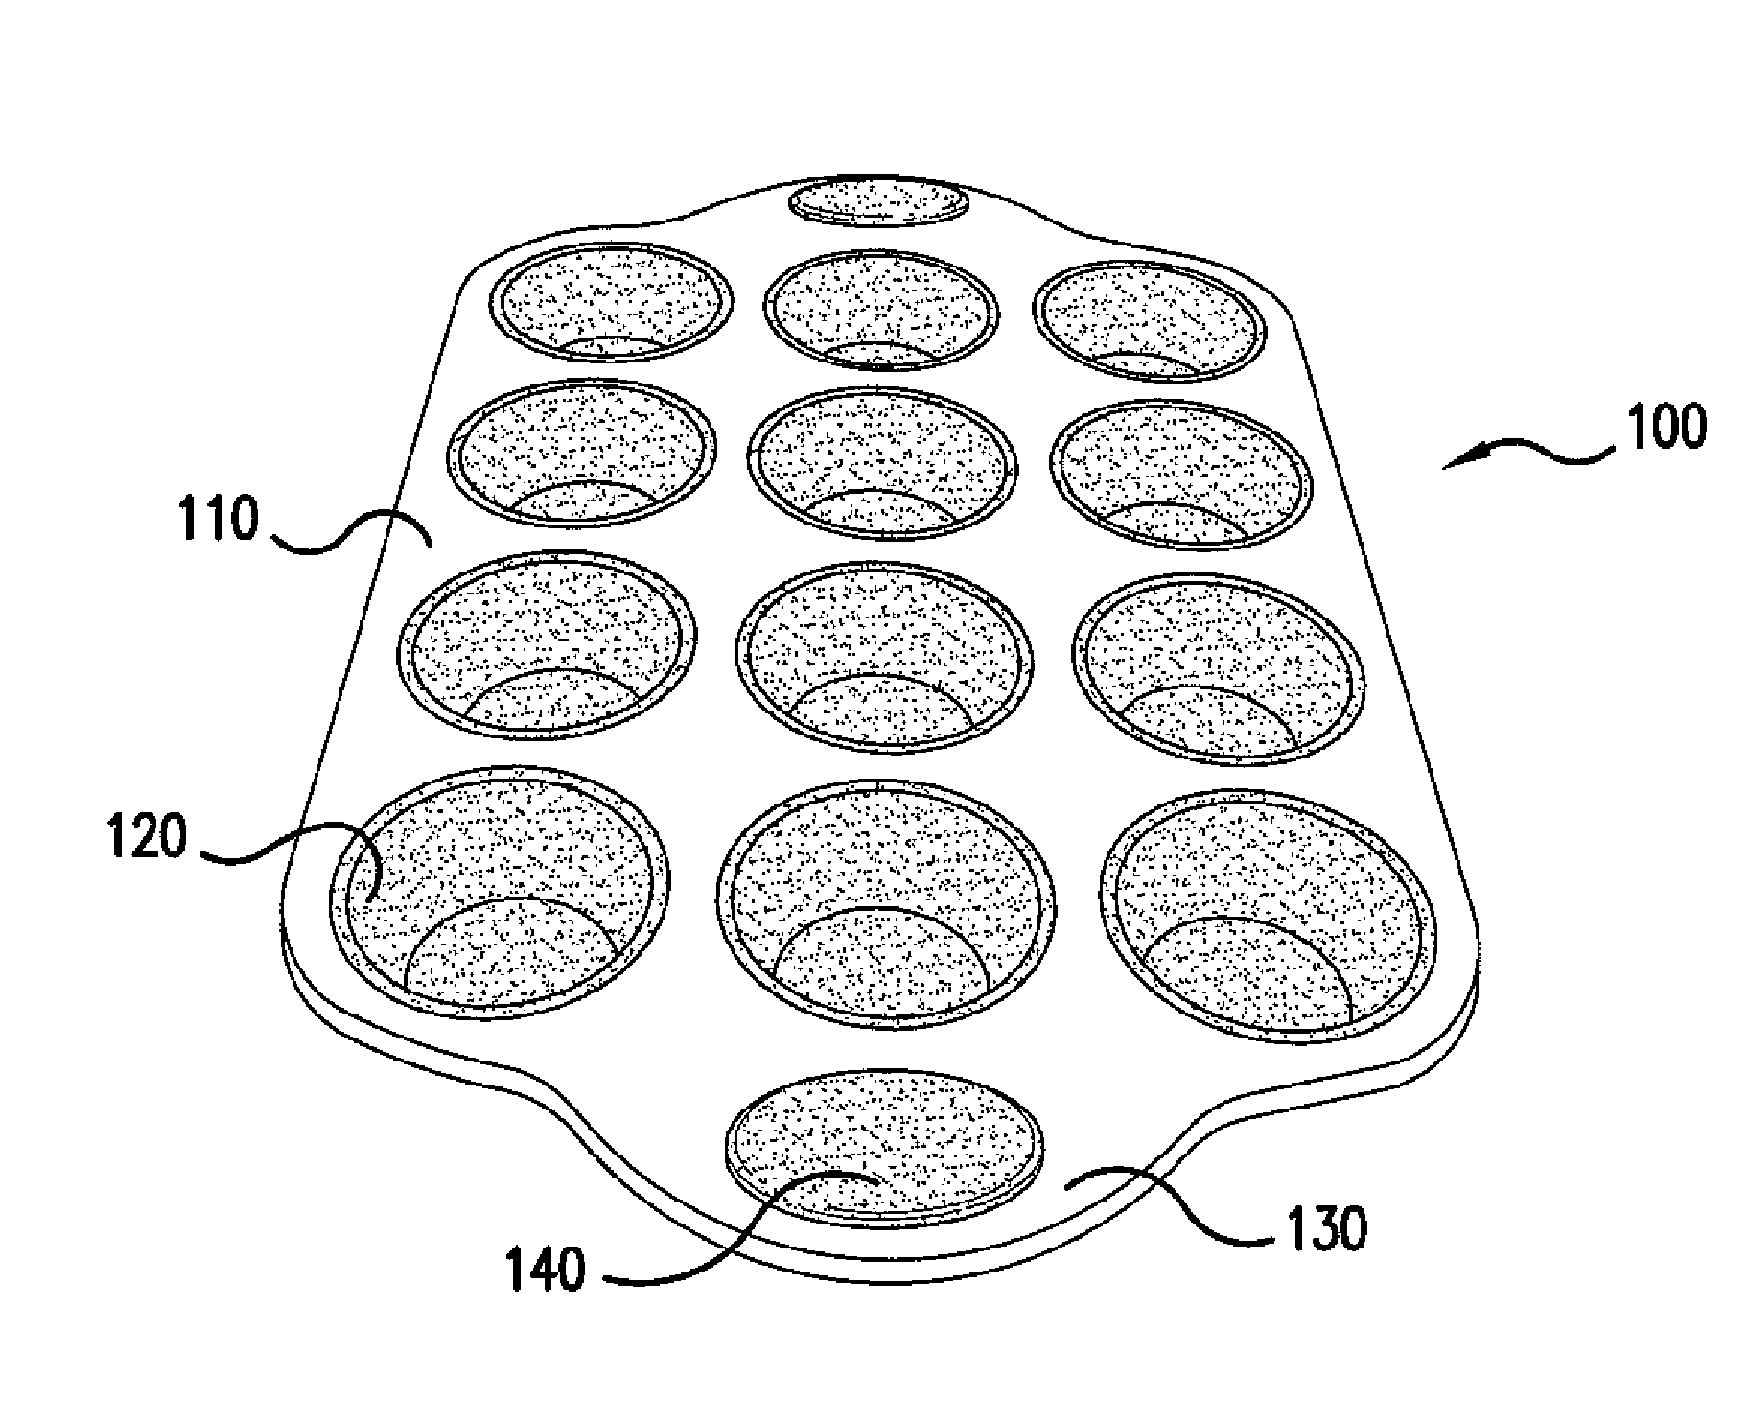 Bakeware having a flexible member and method of manufacturing same